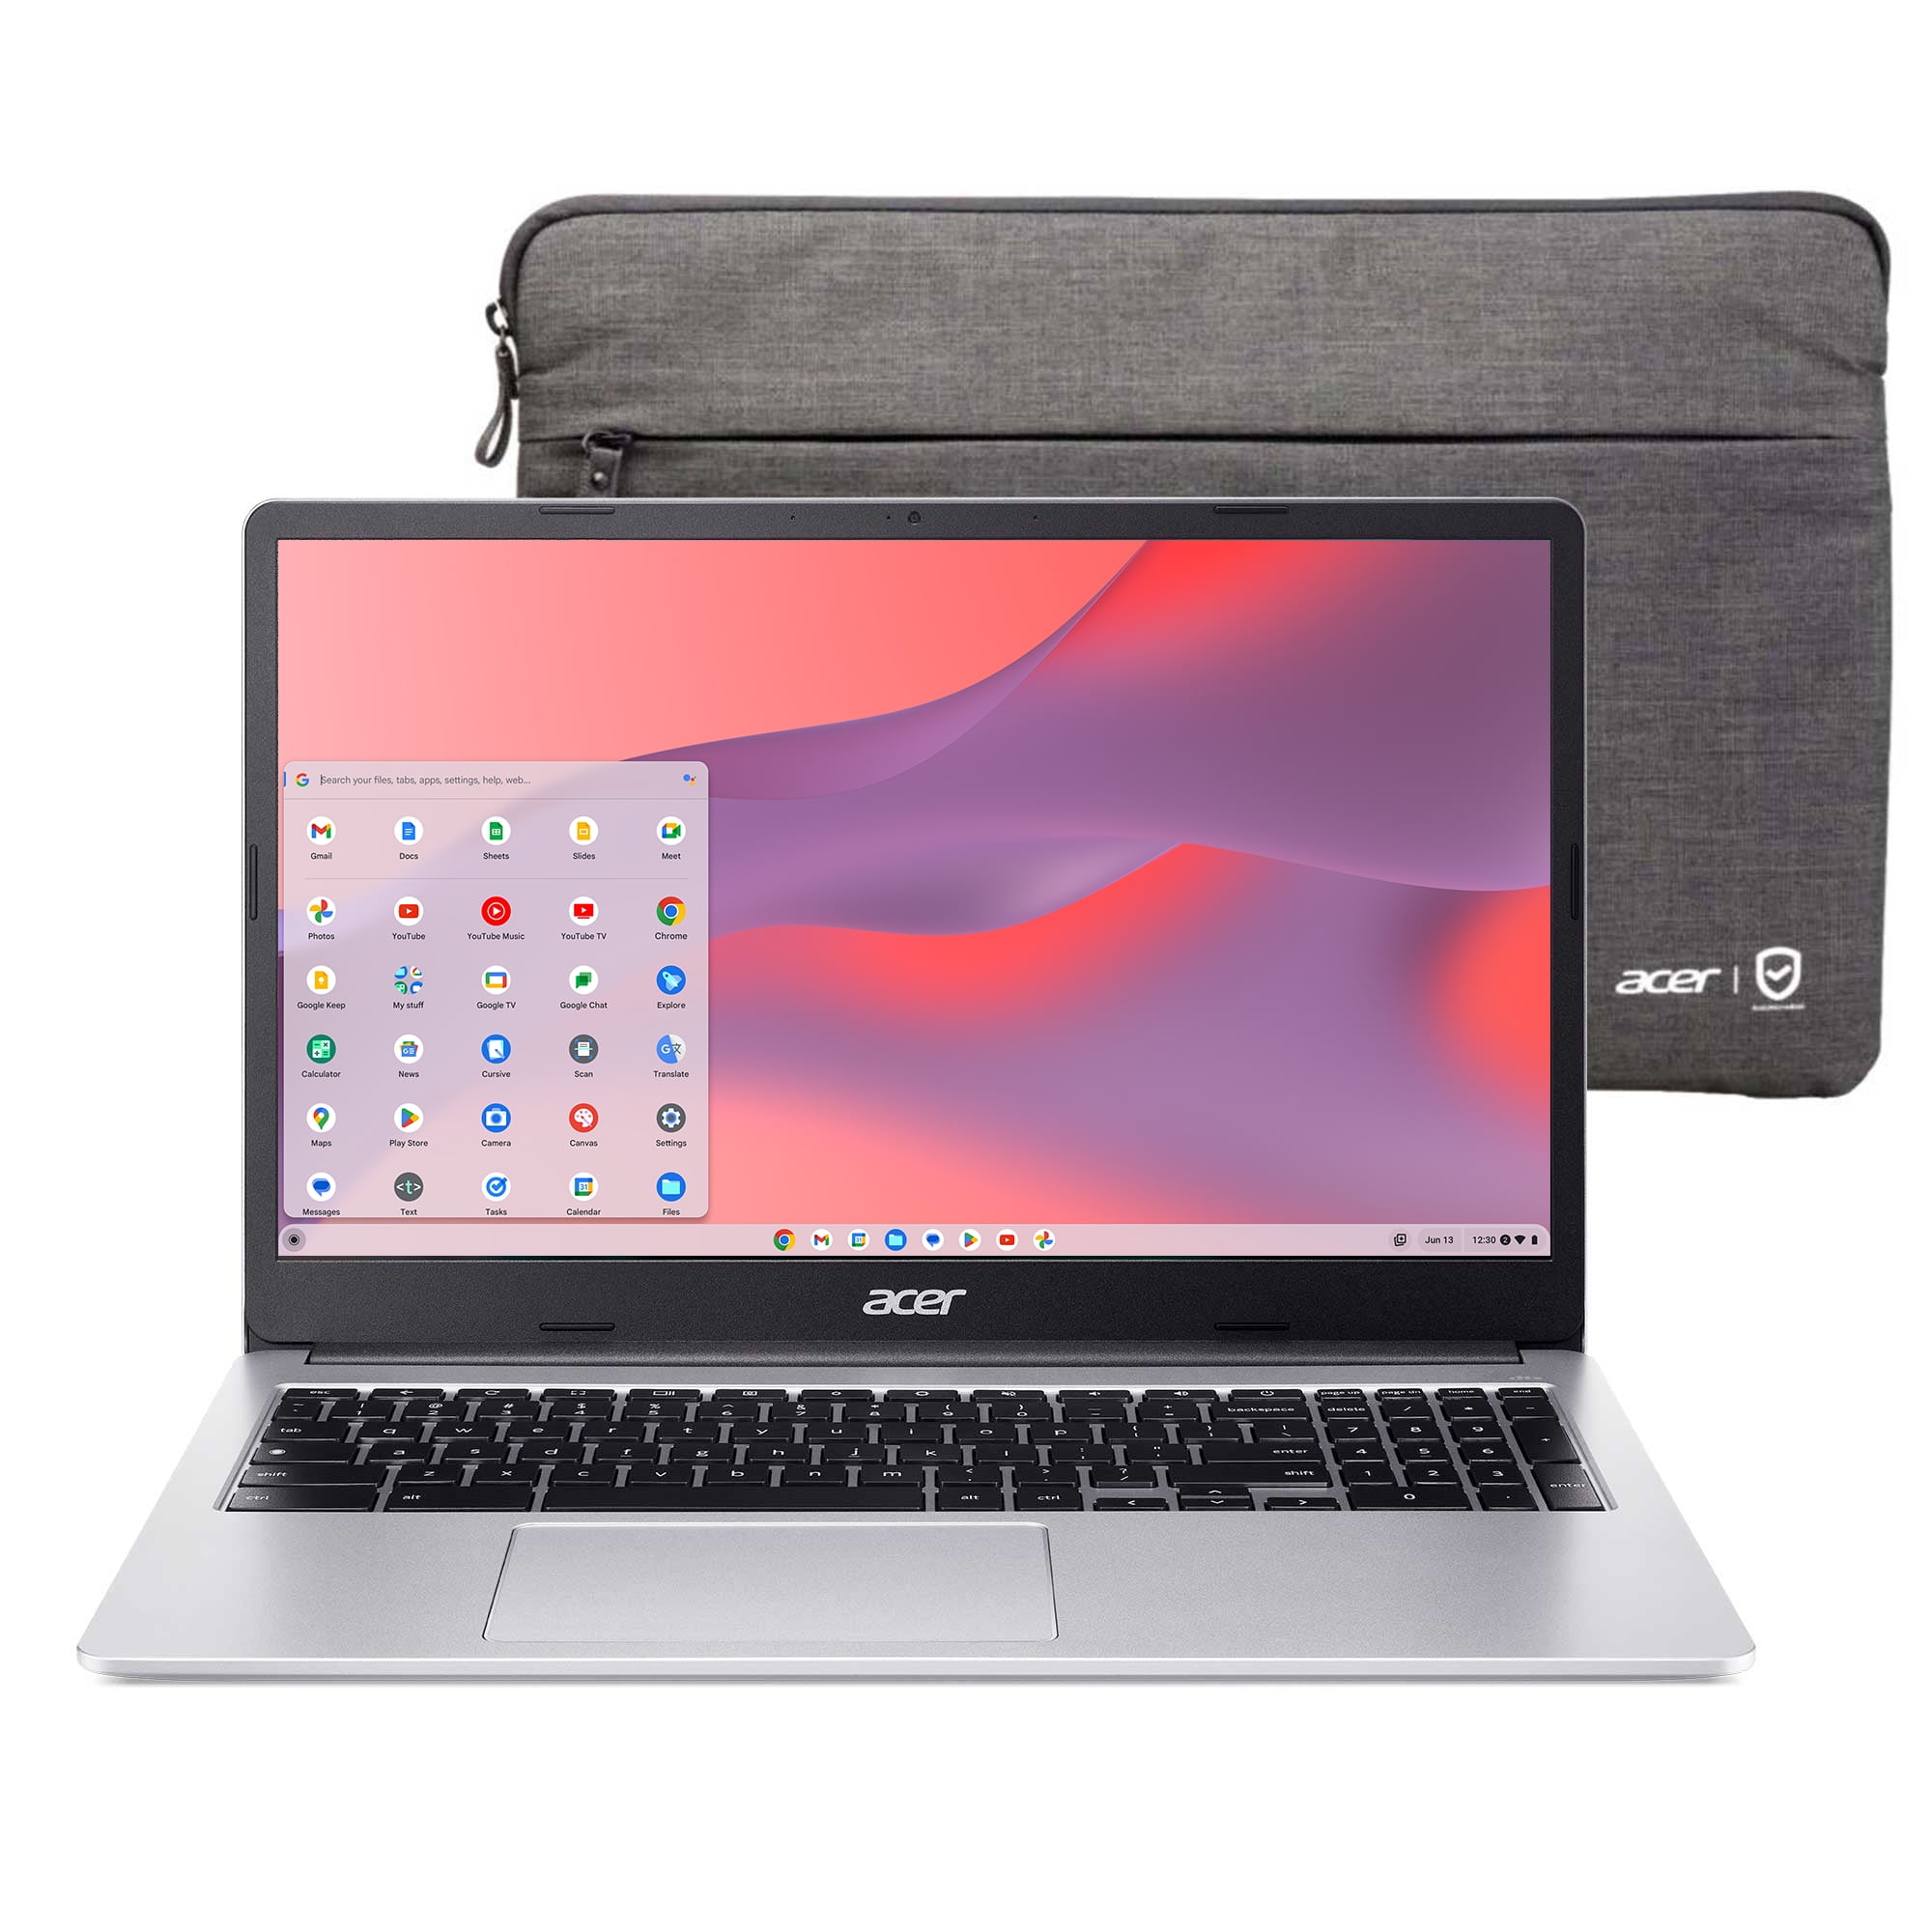 Acer Aspire 5 (2019) review: An incredible thin-and-light laptop